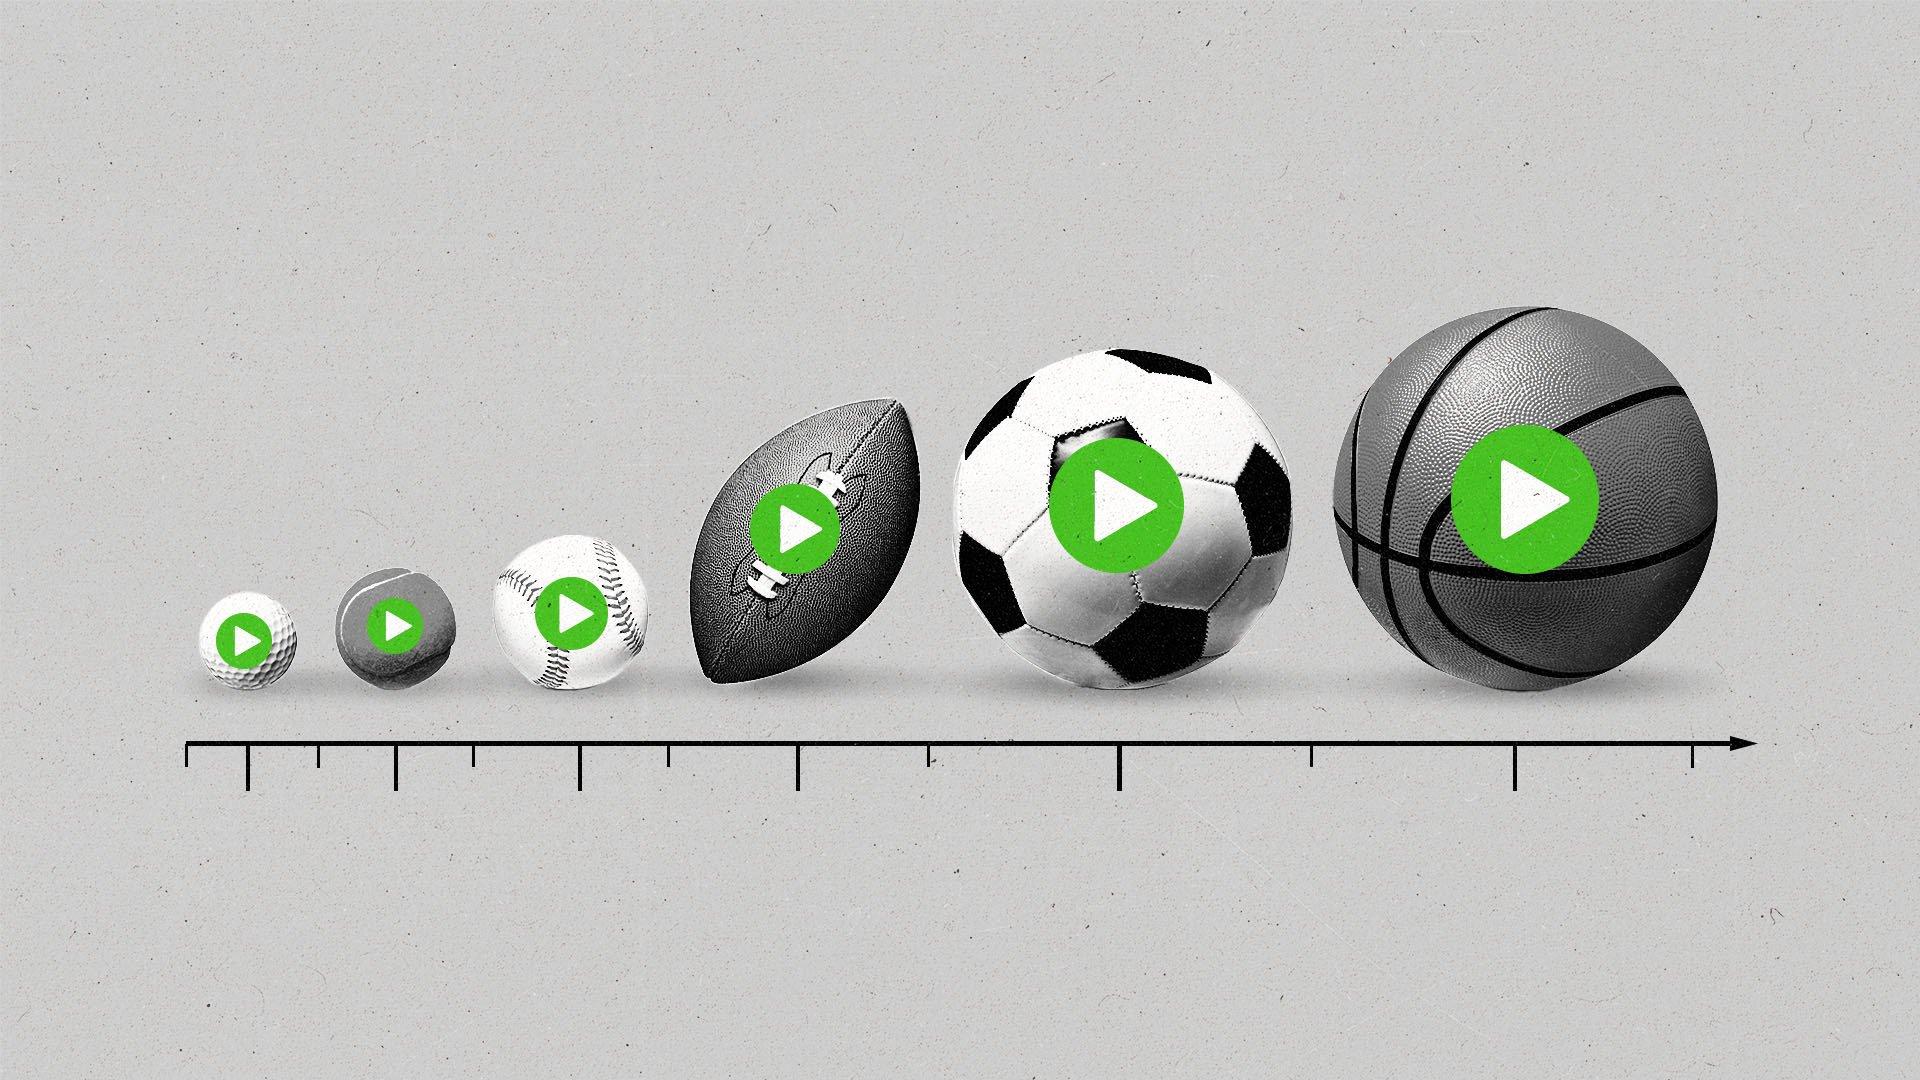 A series of sports balls are lined up in ascending height order along a horizontal timeline.